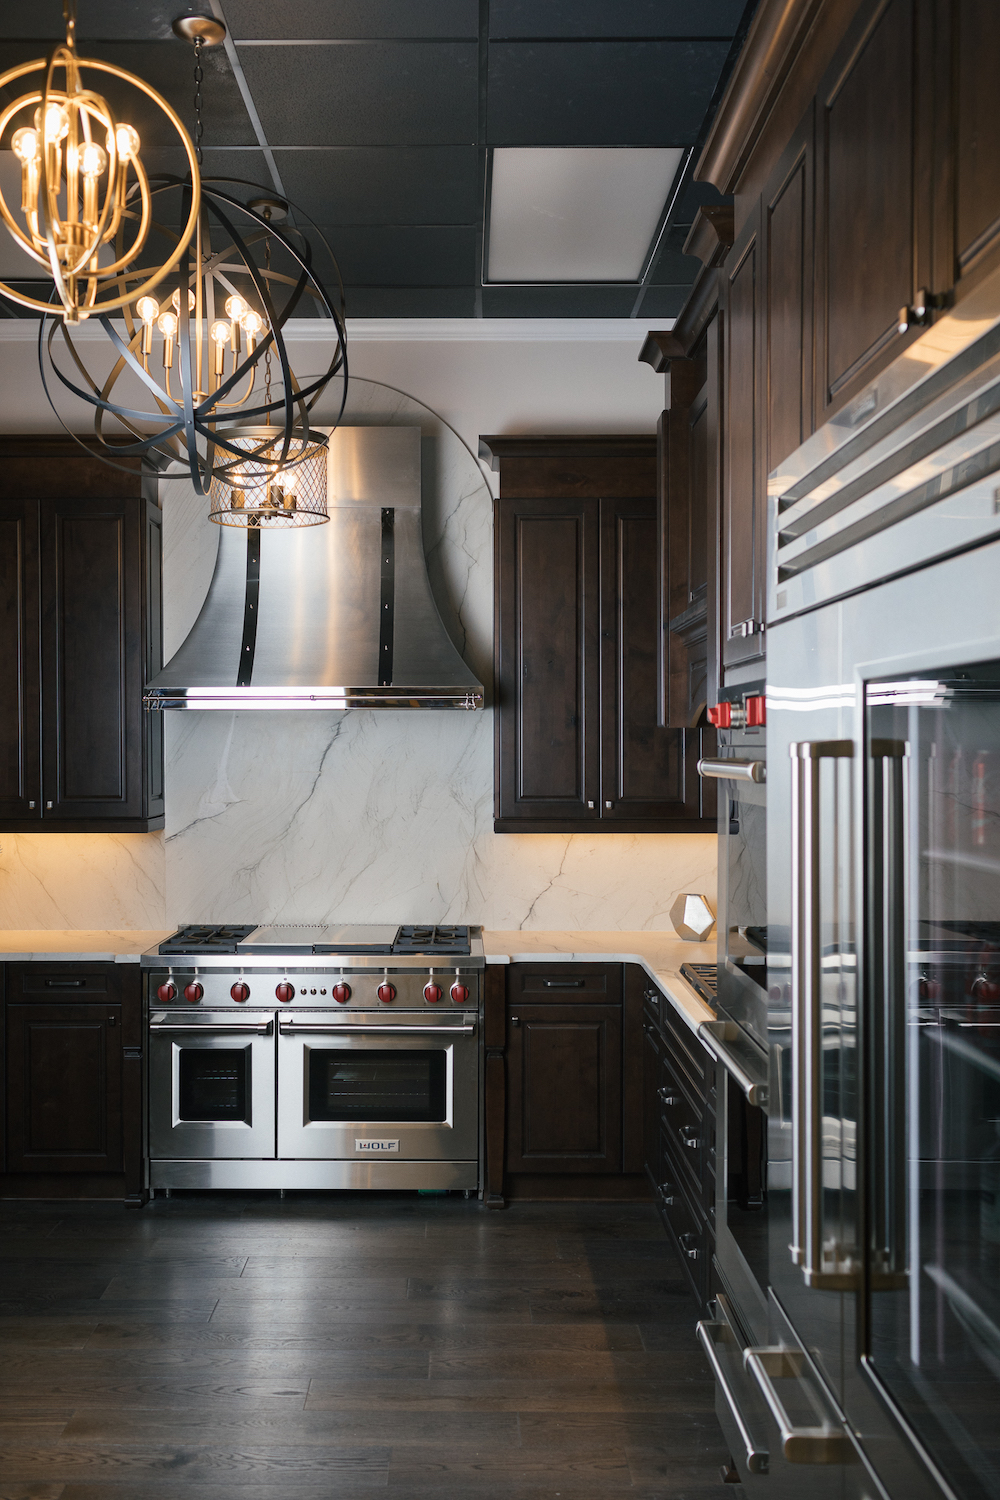 Brown Cabinets with large stainless steel appliance and metal lighting with wood floors